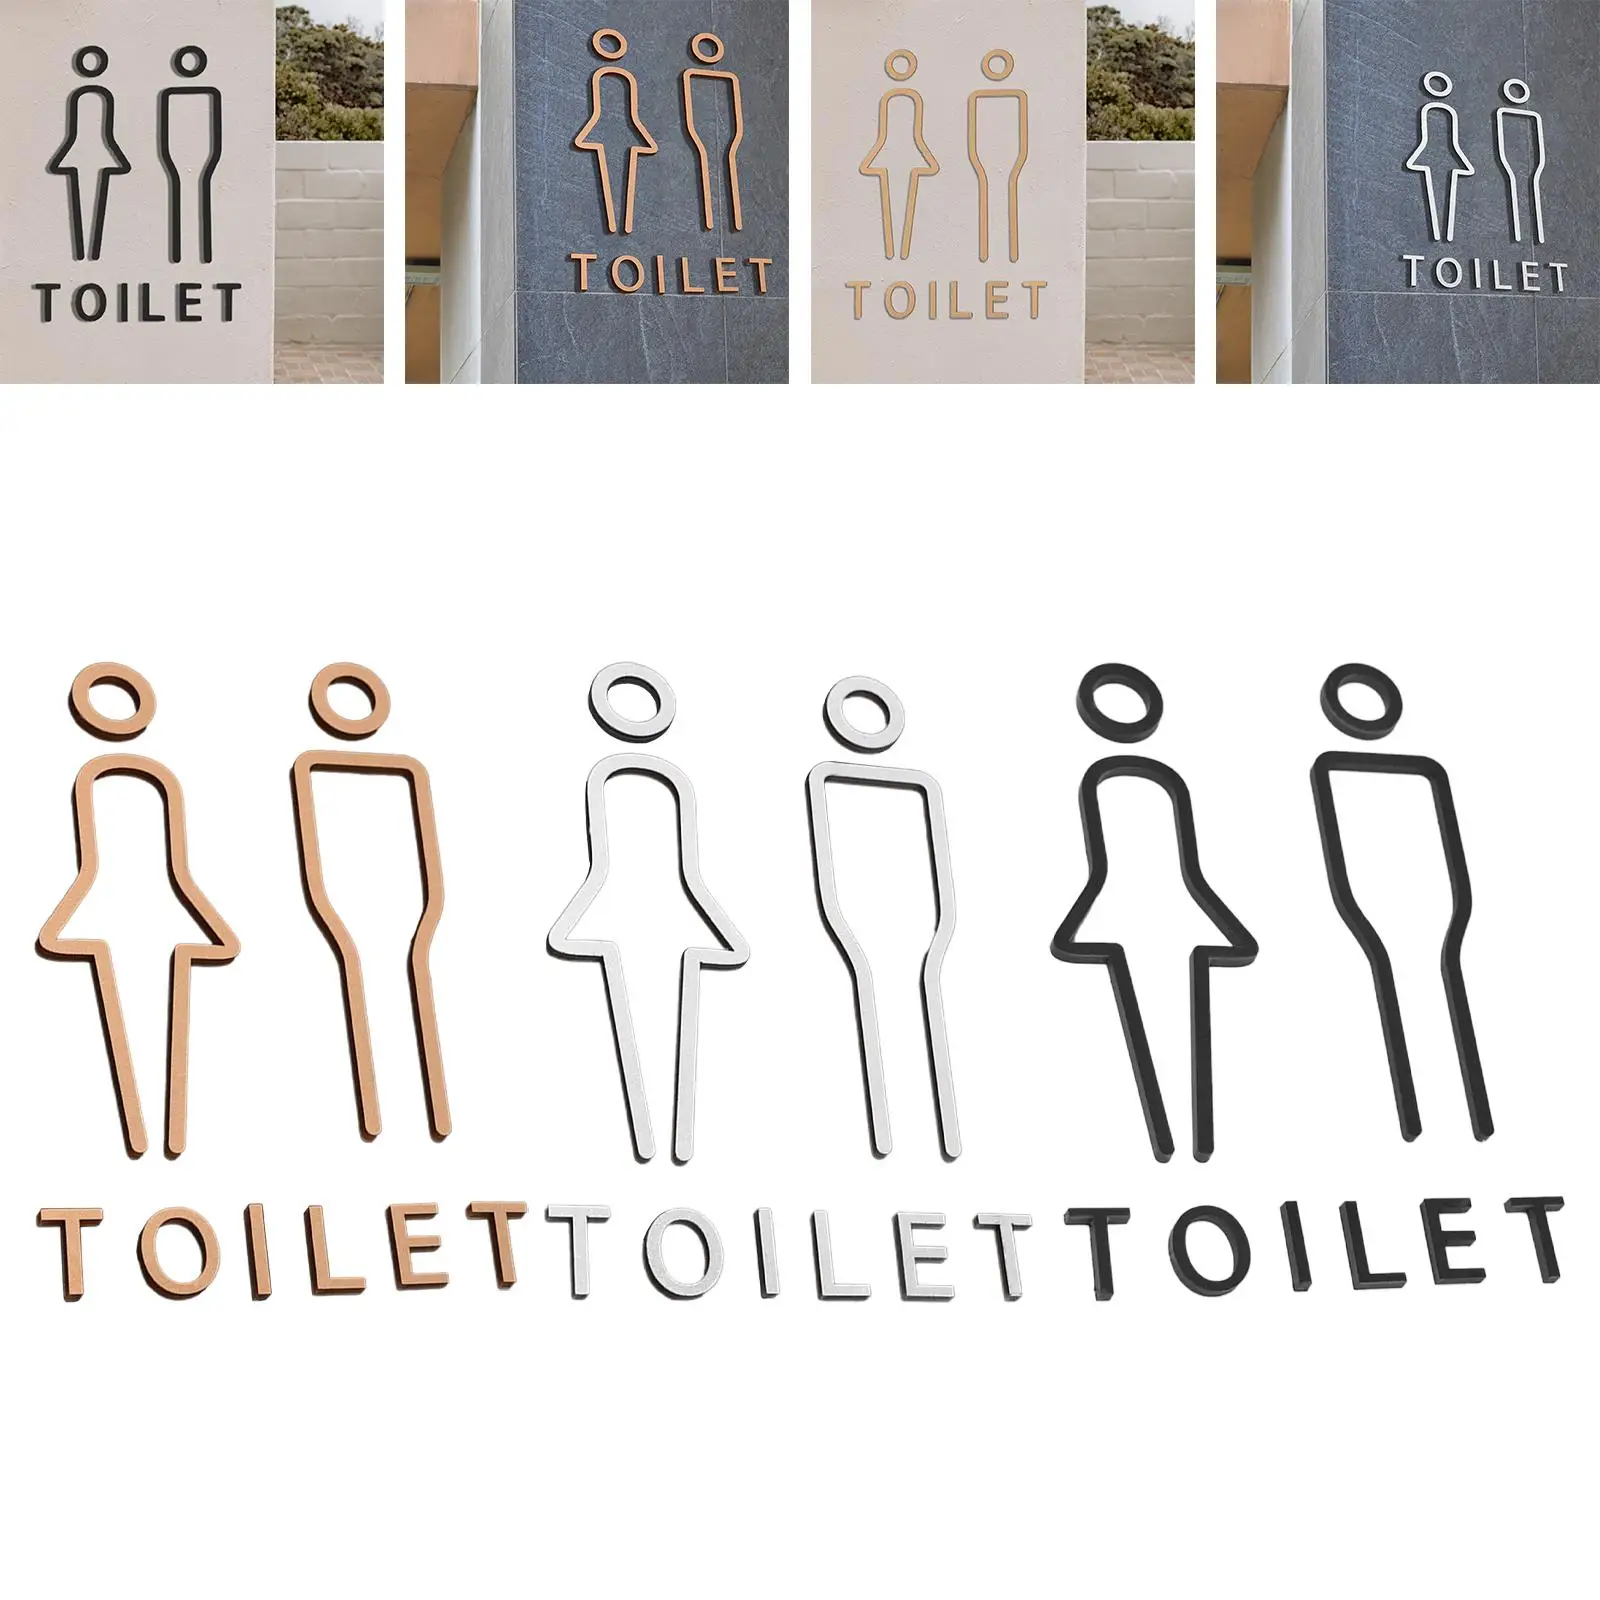 2Pcs Toilet Sign Public Place Decor Office Retro Wall Label Sticker Male Female No Drilling WC Sign Toilet Signage Signage Board